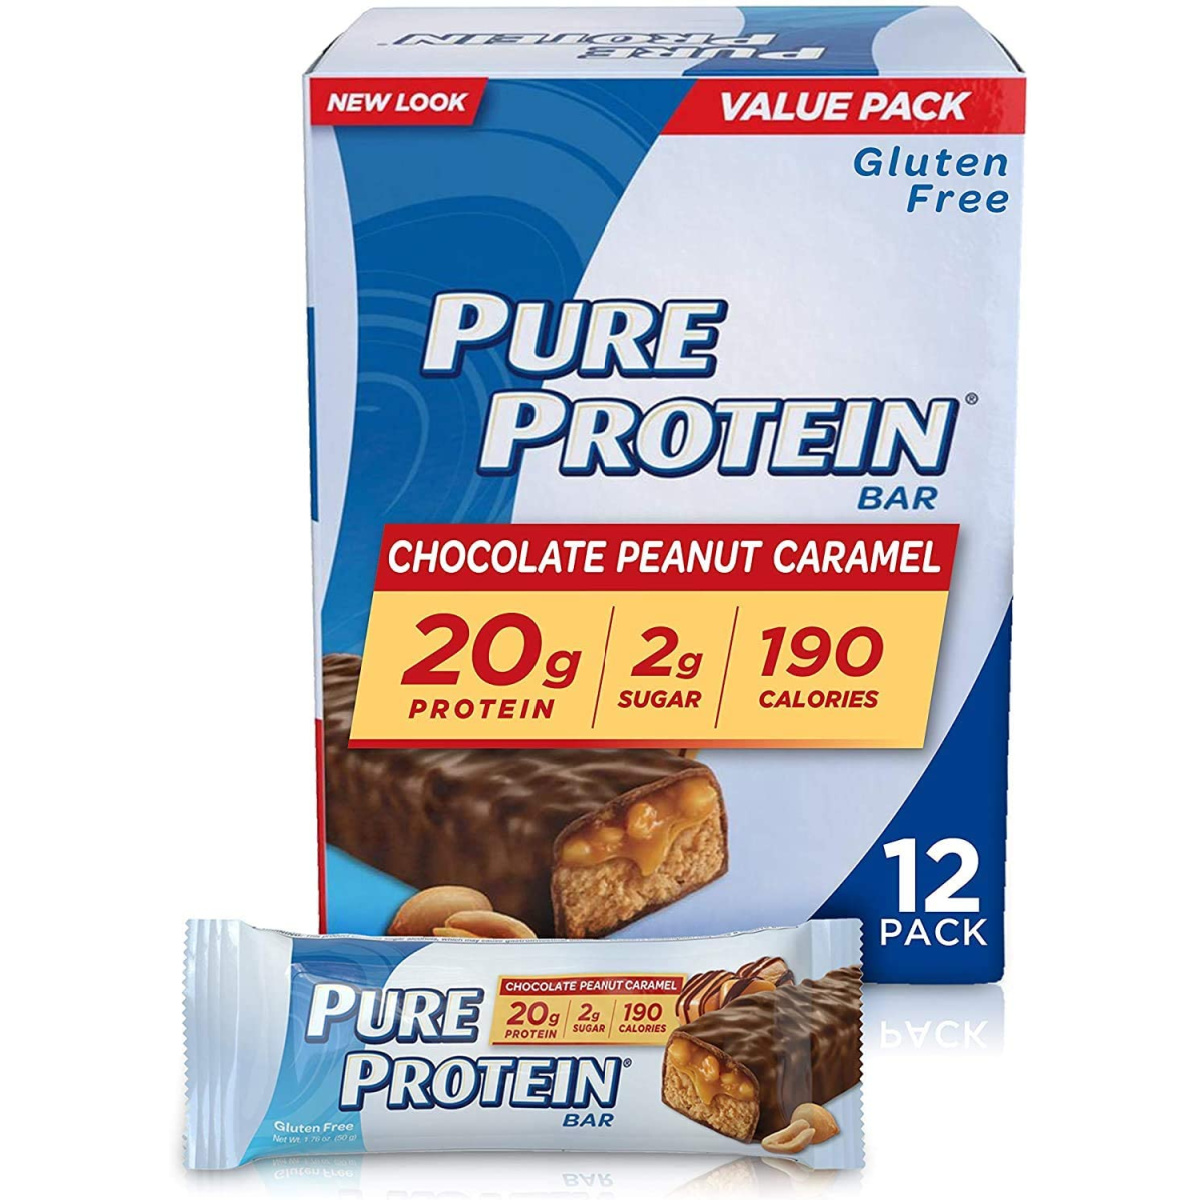 Large box of protein bars